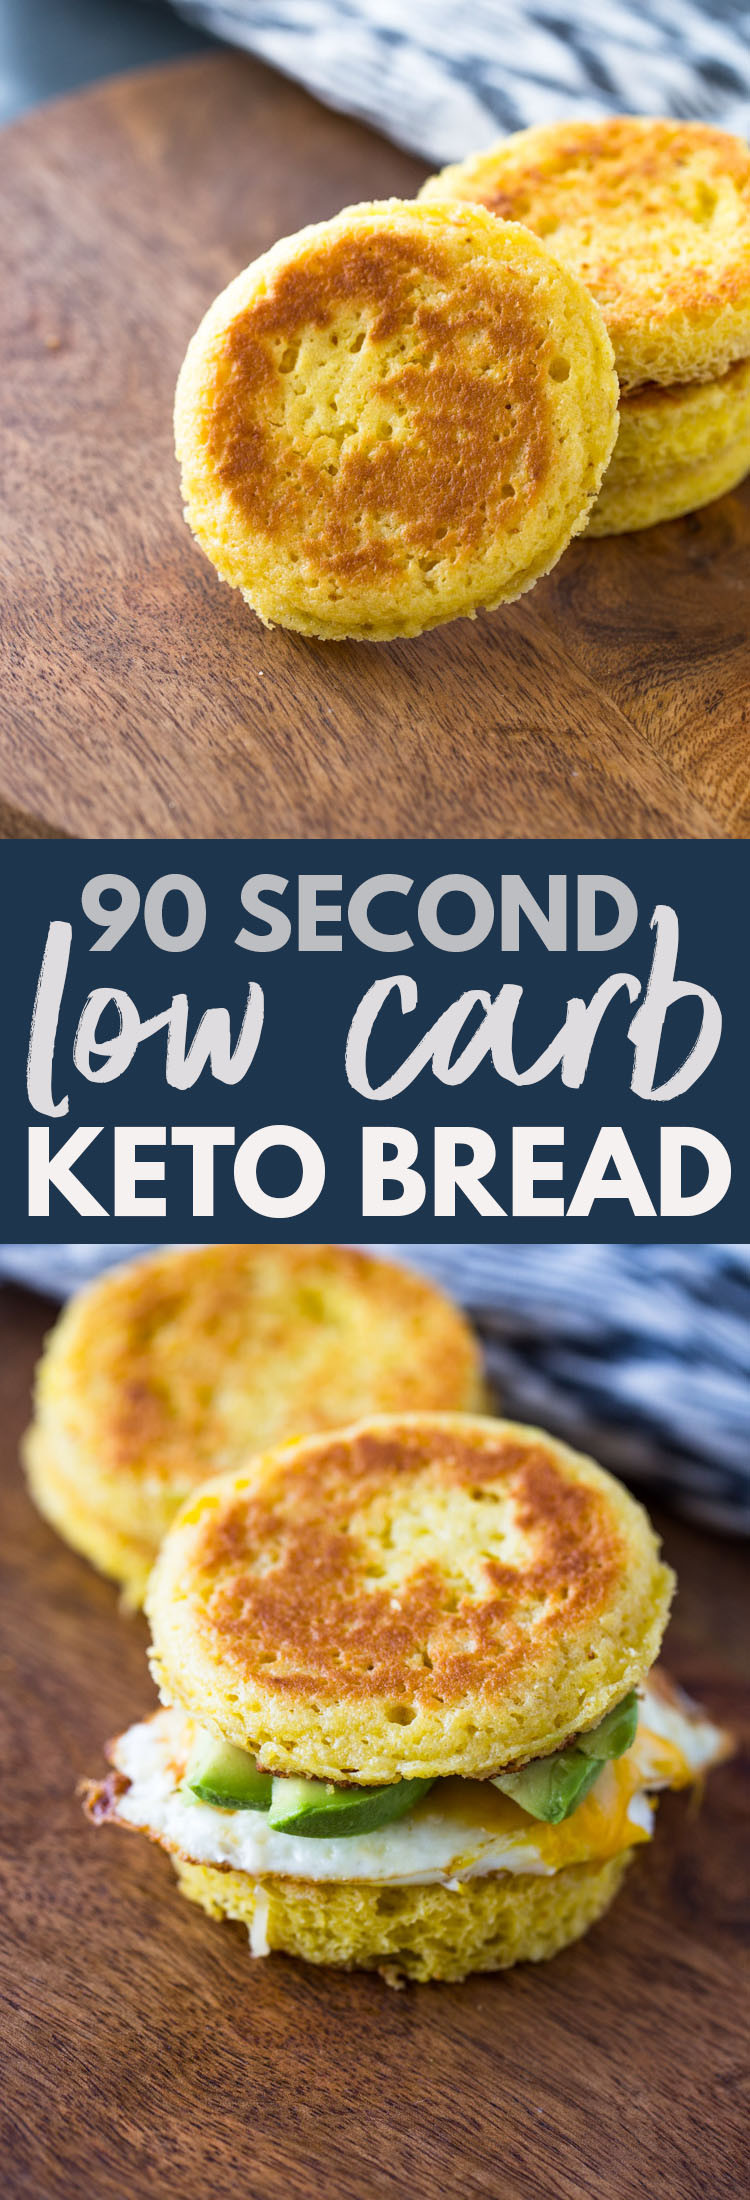 90 Second Keto Bread Microwave
 90 Second Microwavable Low Carb Keto Bread